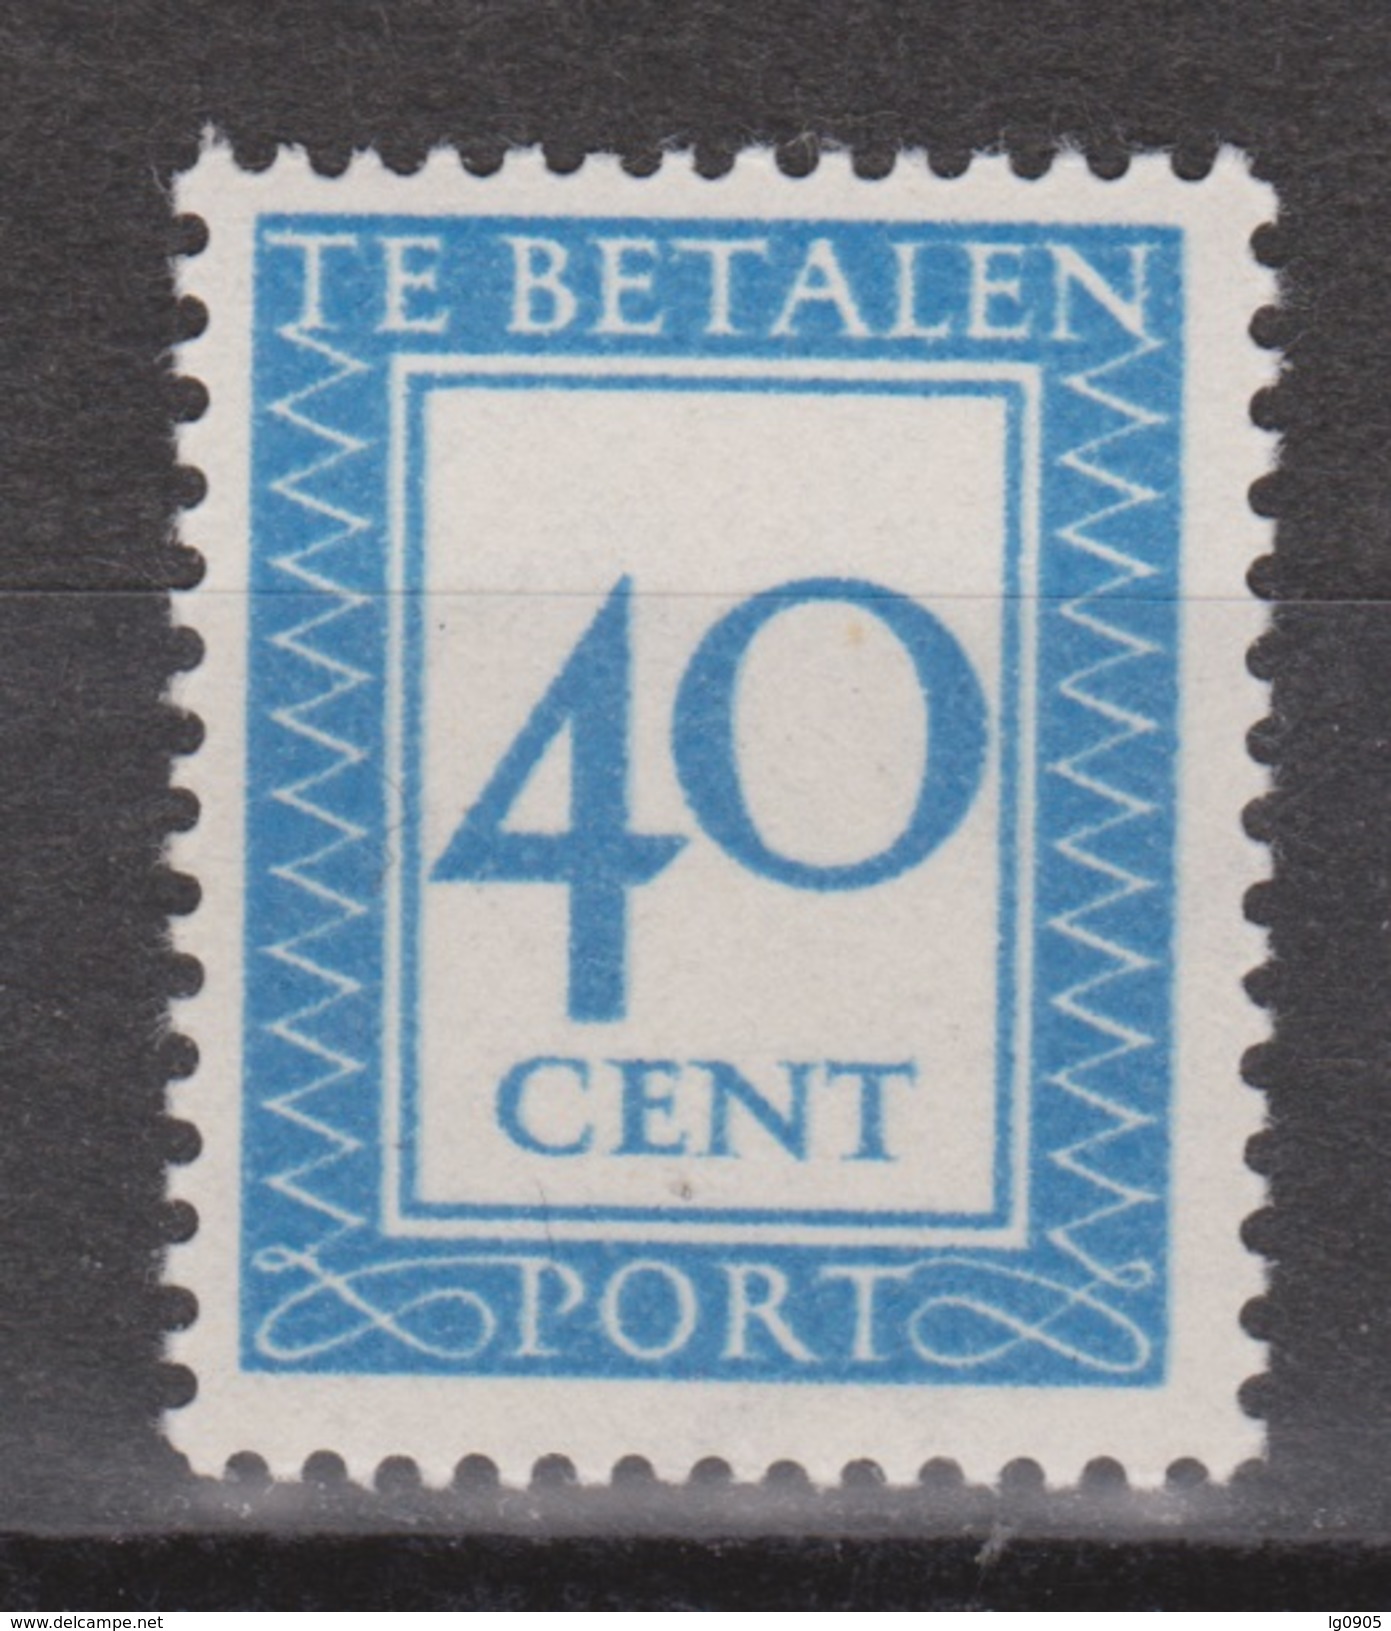 NVPH Nederland Netherlands Holanda Pays Bas Port 99 MLH Timbre-taxe Postmarke Sellos De Correos NOW MANY DUE STAMPS - Postage Due